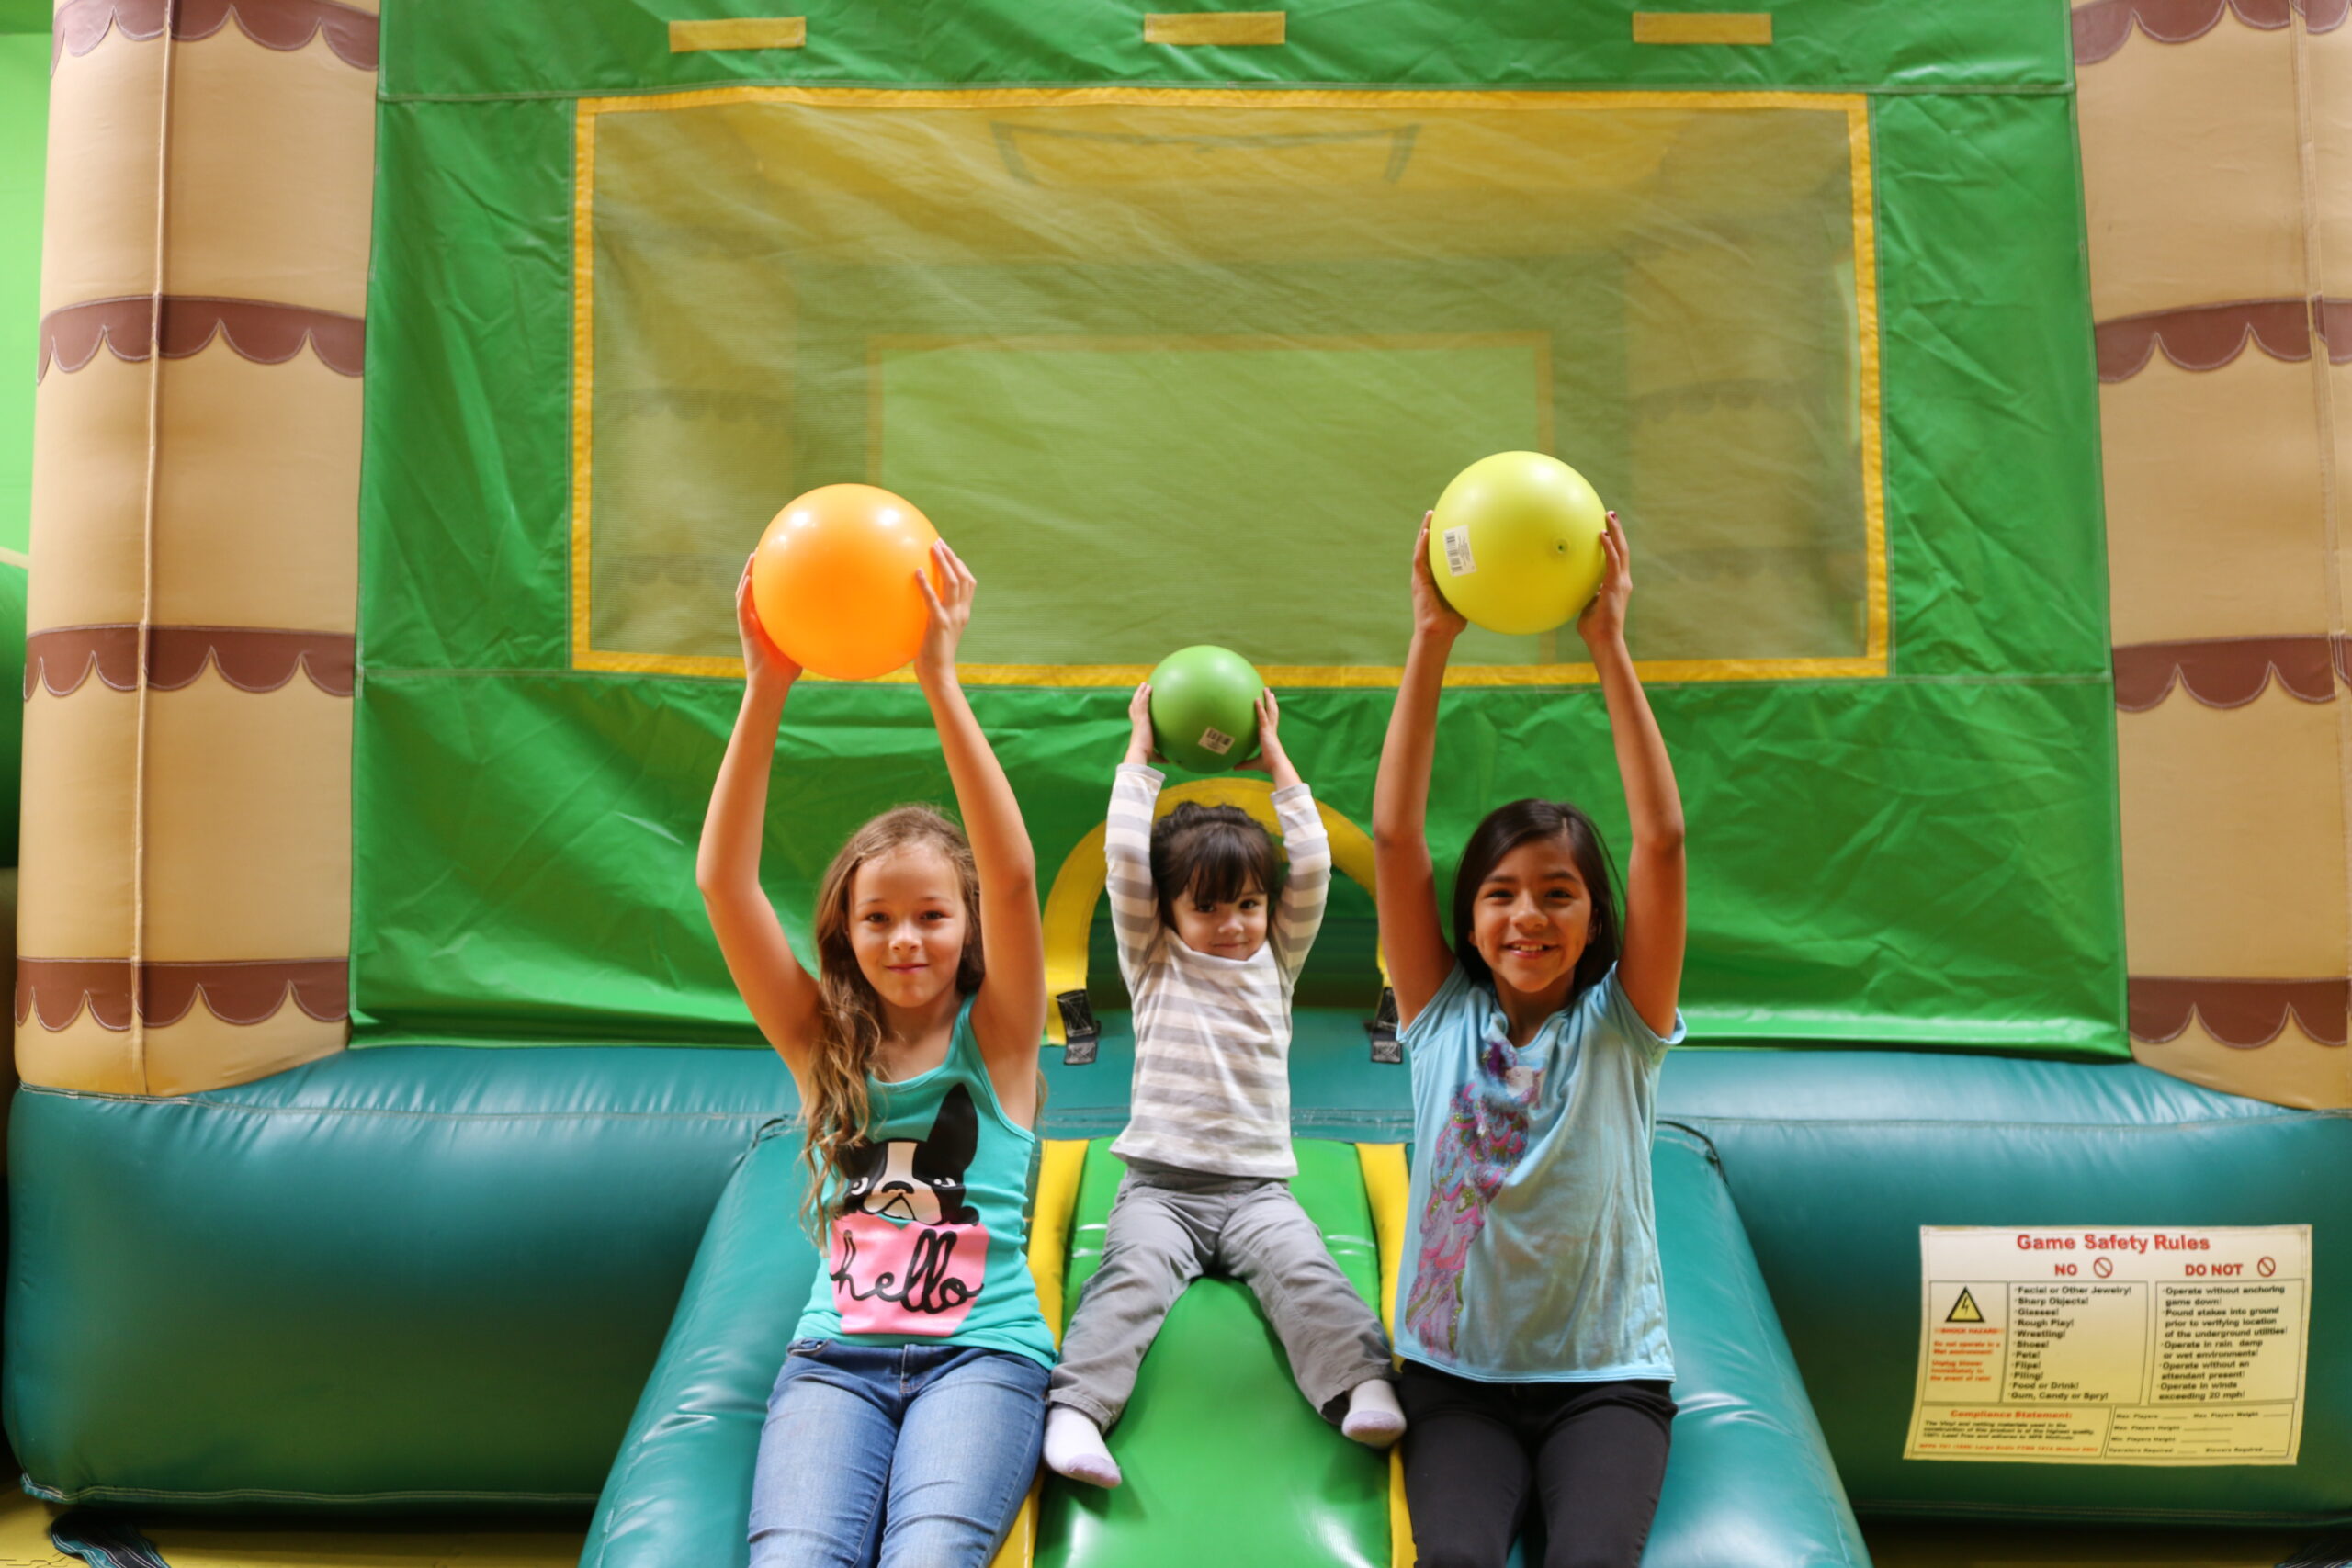 Three children playing in a bounce house with balloons.